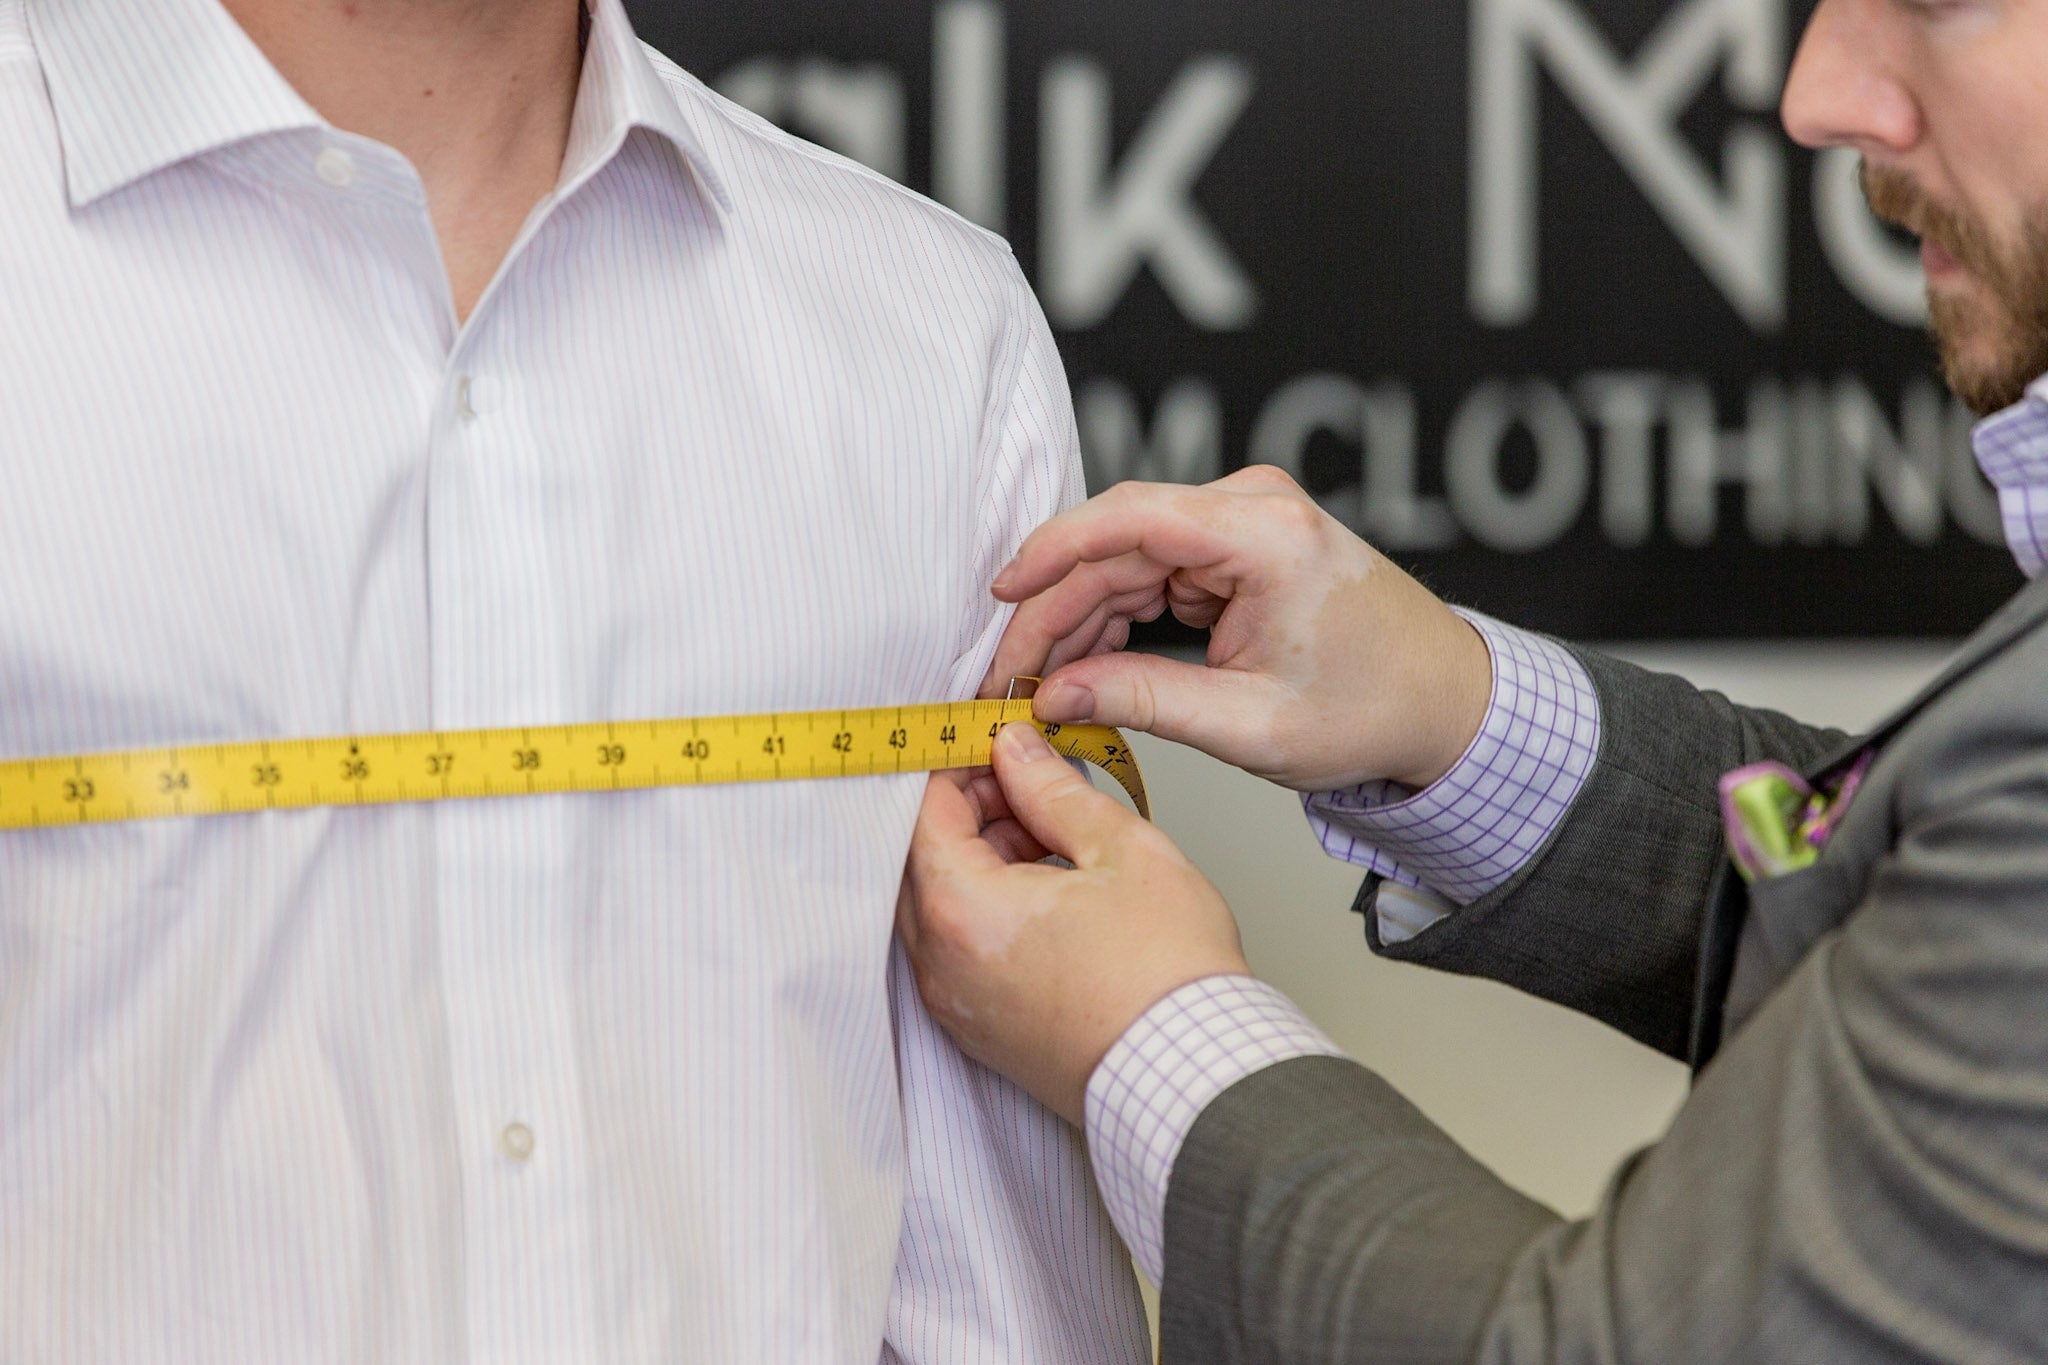 Men's Custom Suit Measurements - How to Measure for a Tailored